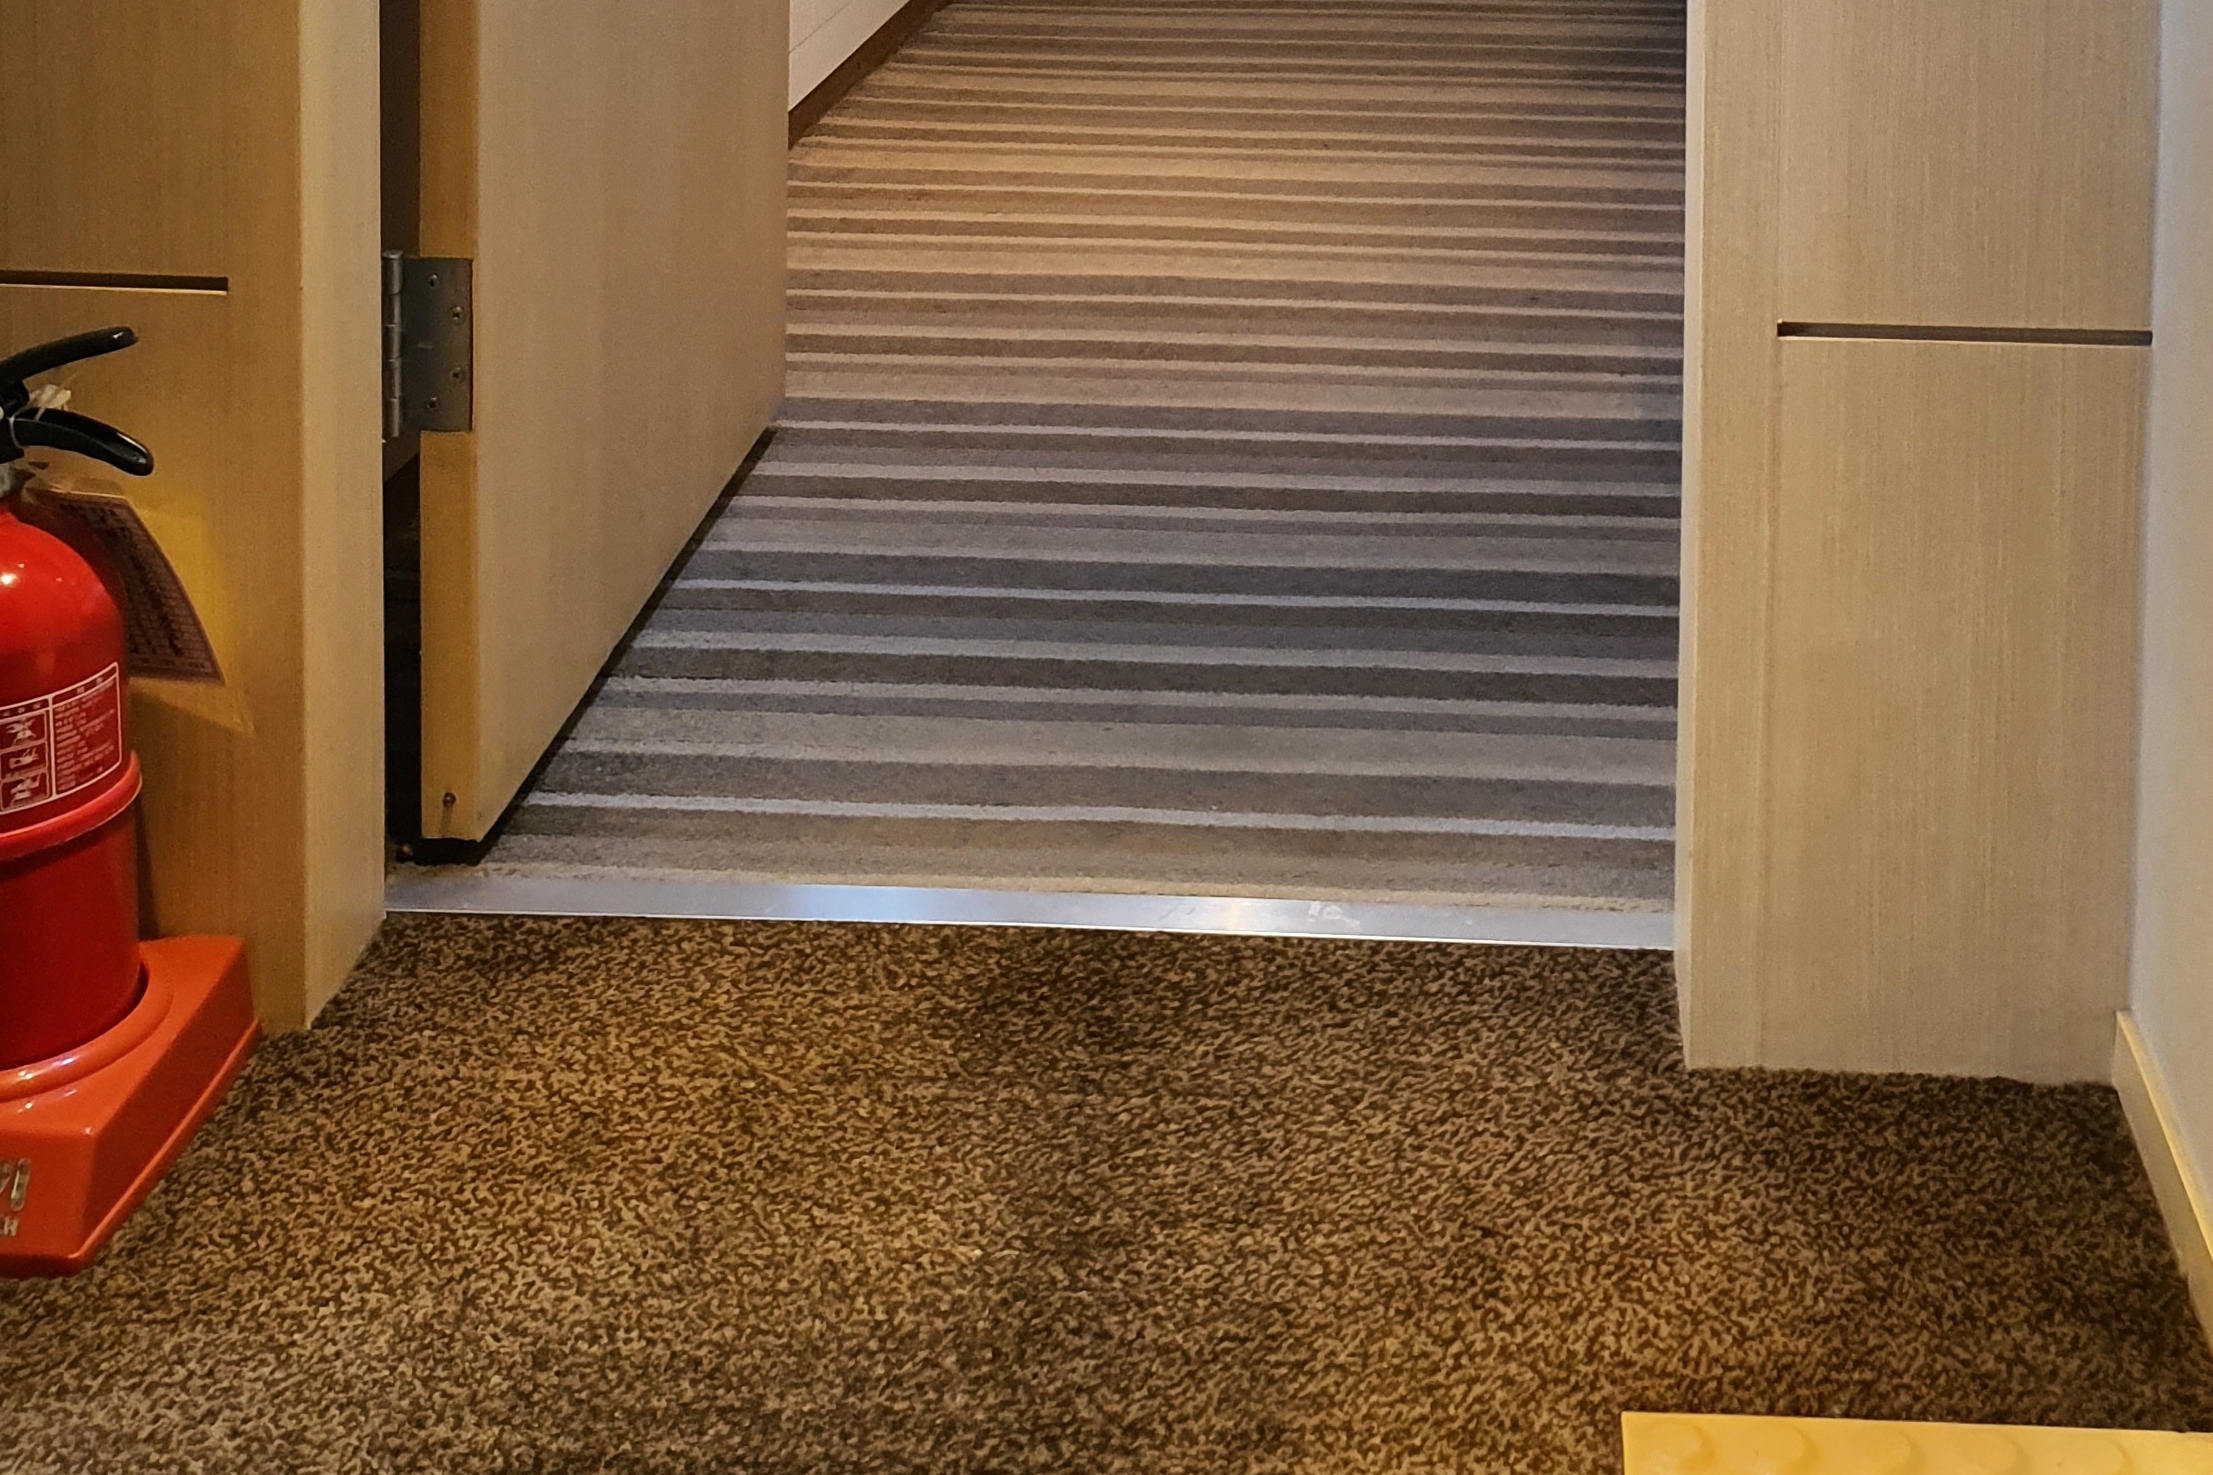 Accessible guestroom0 : Close-up of the flat doorway of the guest room